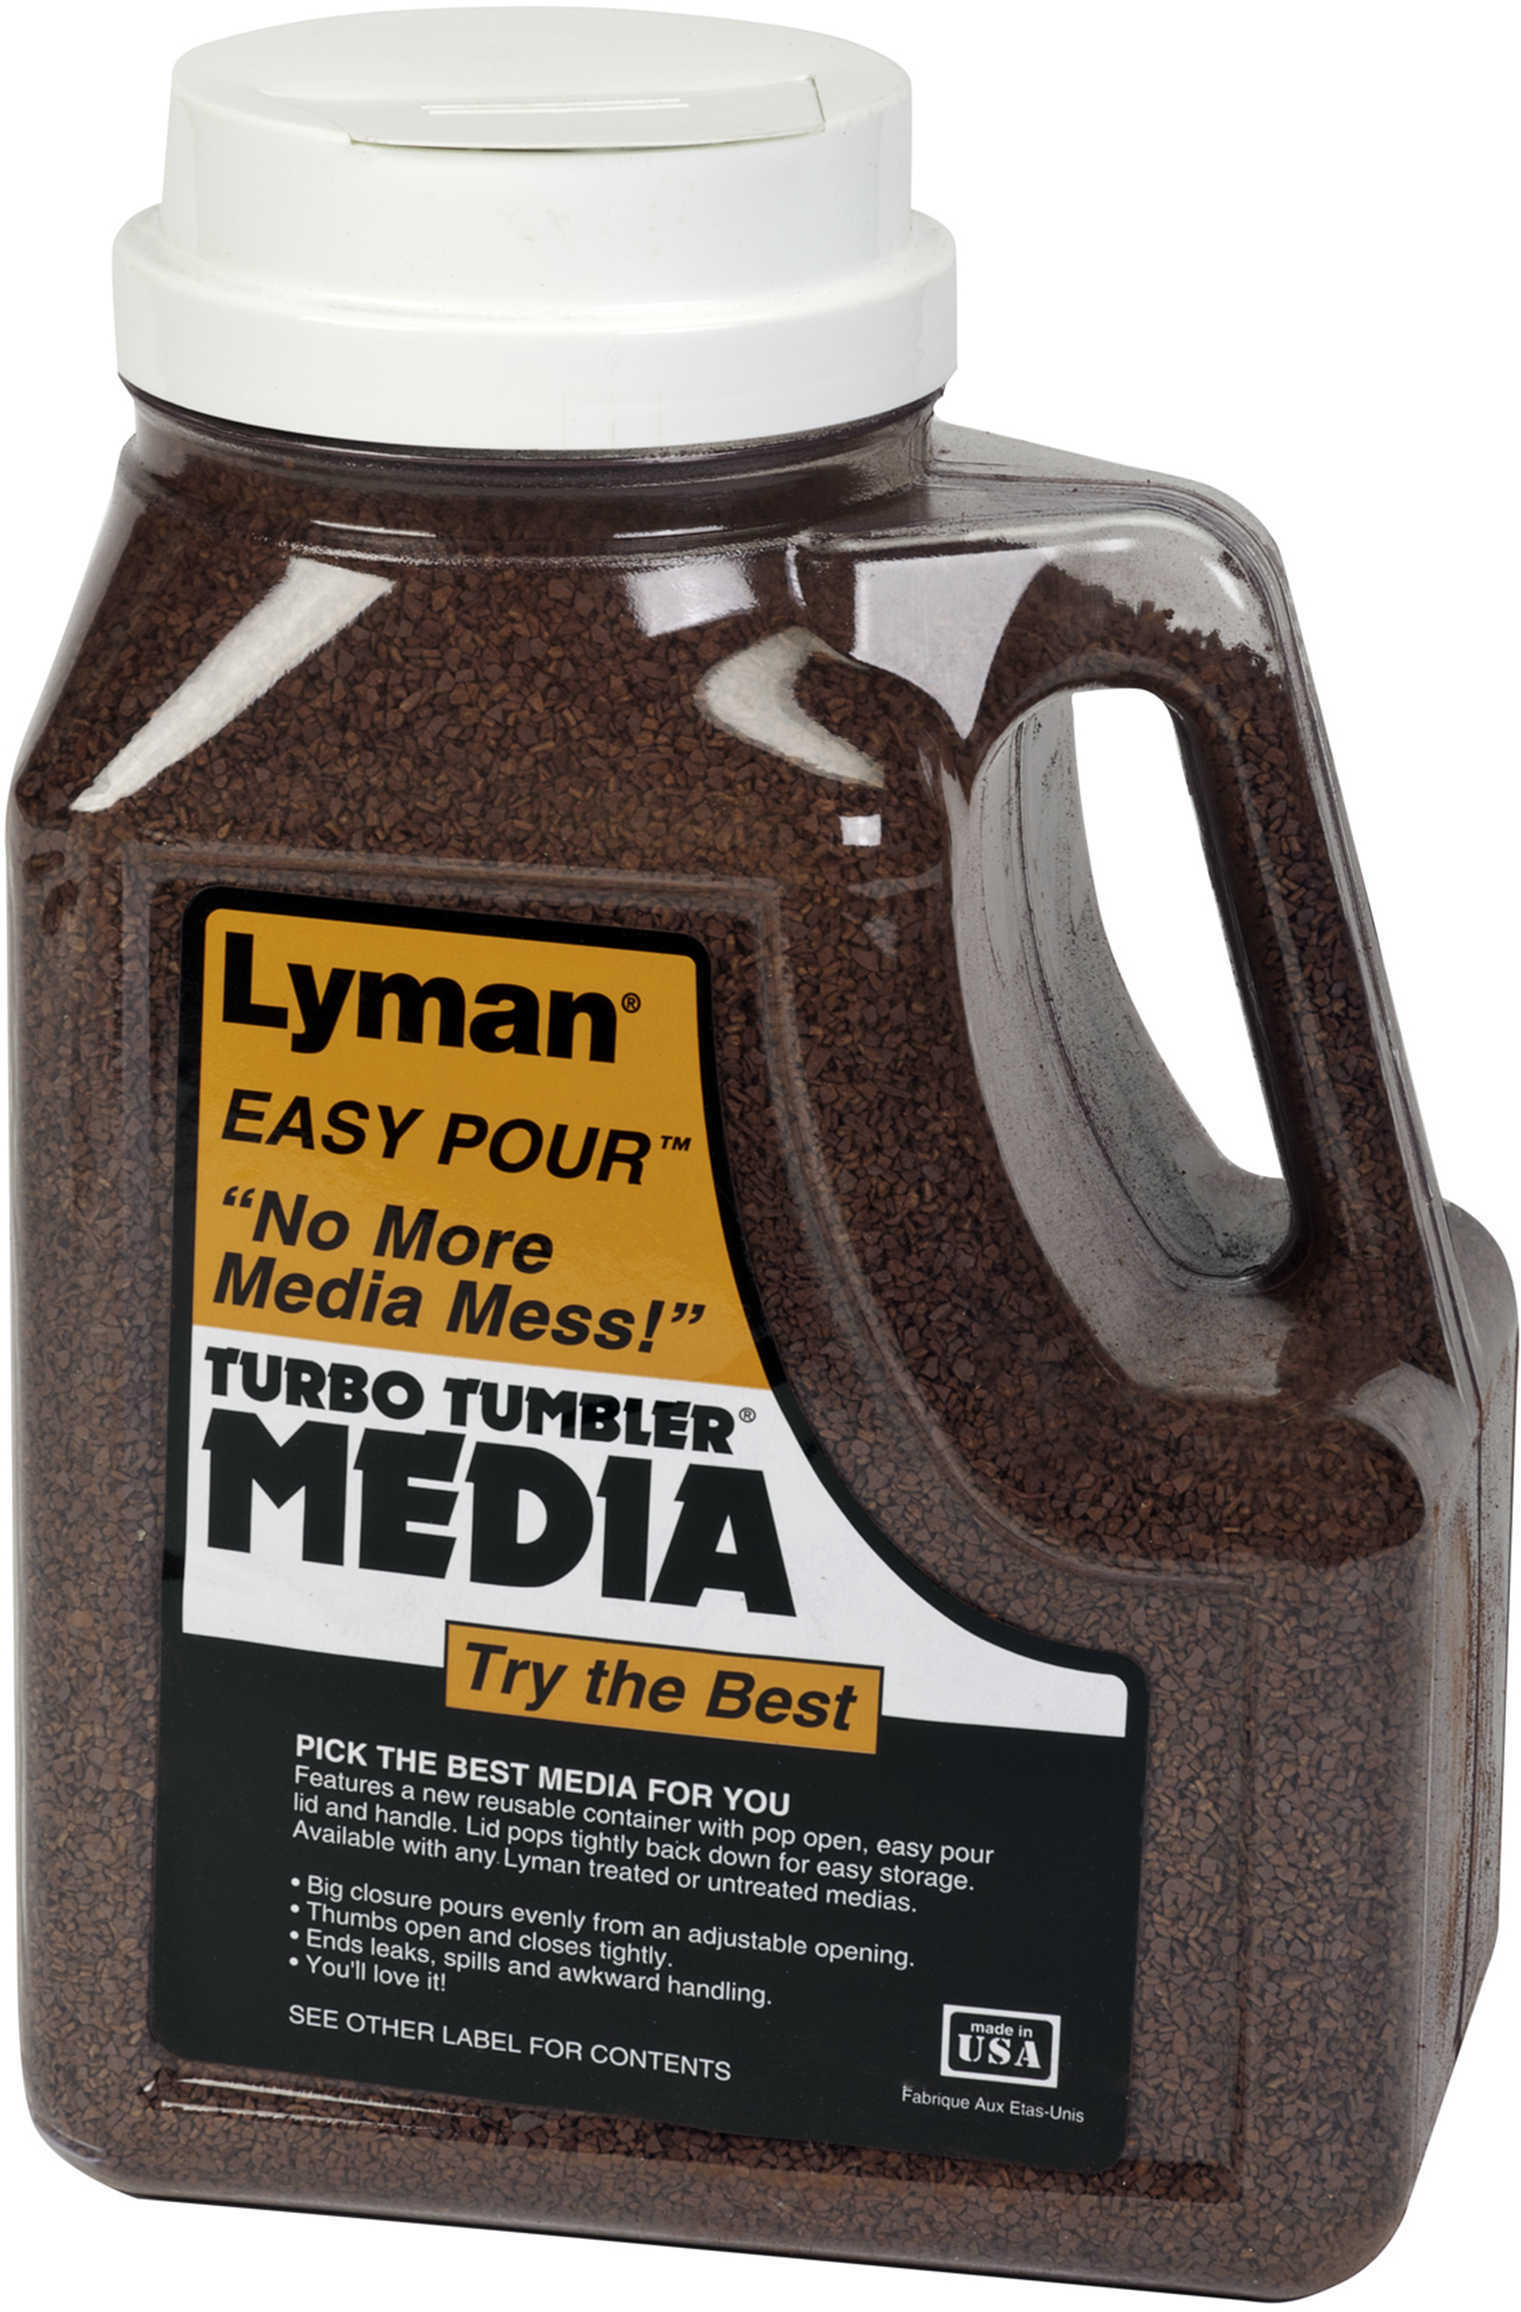 Lyman Turbo Case Cleaning Media Tufnut - 7 Lb. "Easy Pour Container" The Most Effective Choice For Dirty And Ta